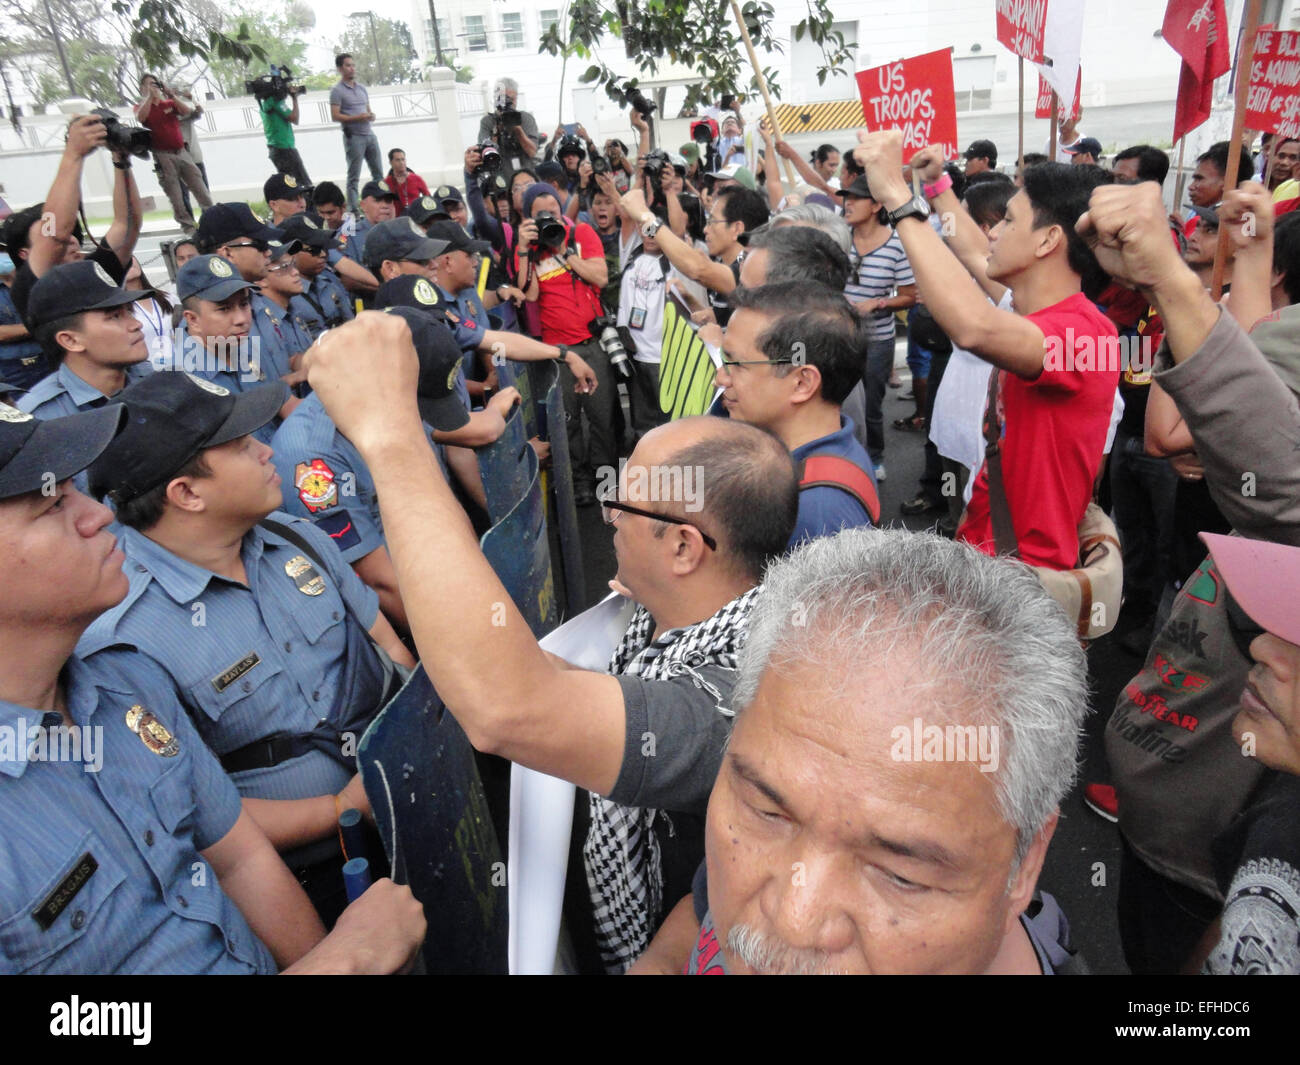 Protesters raise clenched fists as policemen block them from approaching the US Embassy. Protesters accused President Benigno Aquino III, suspended police chief Alan Purisinma, and the US government of being involved in the botched anti-terror operation that killed 44 police commandos, 18 Moro rebels, and 7 civilians. The protest was held on the 116th anniversary of the Filipino-American War that claimed at least 600,000 lives. © Richard James Mendoza/Pacific Press/Alamy Live News Stock Photo